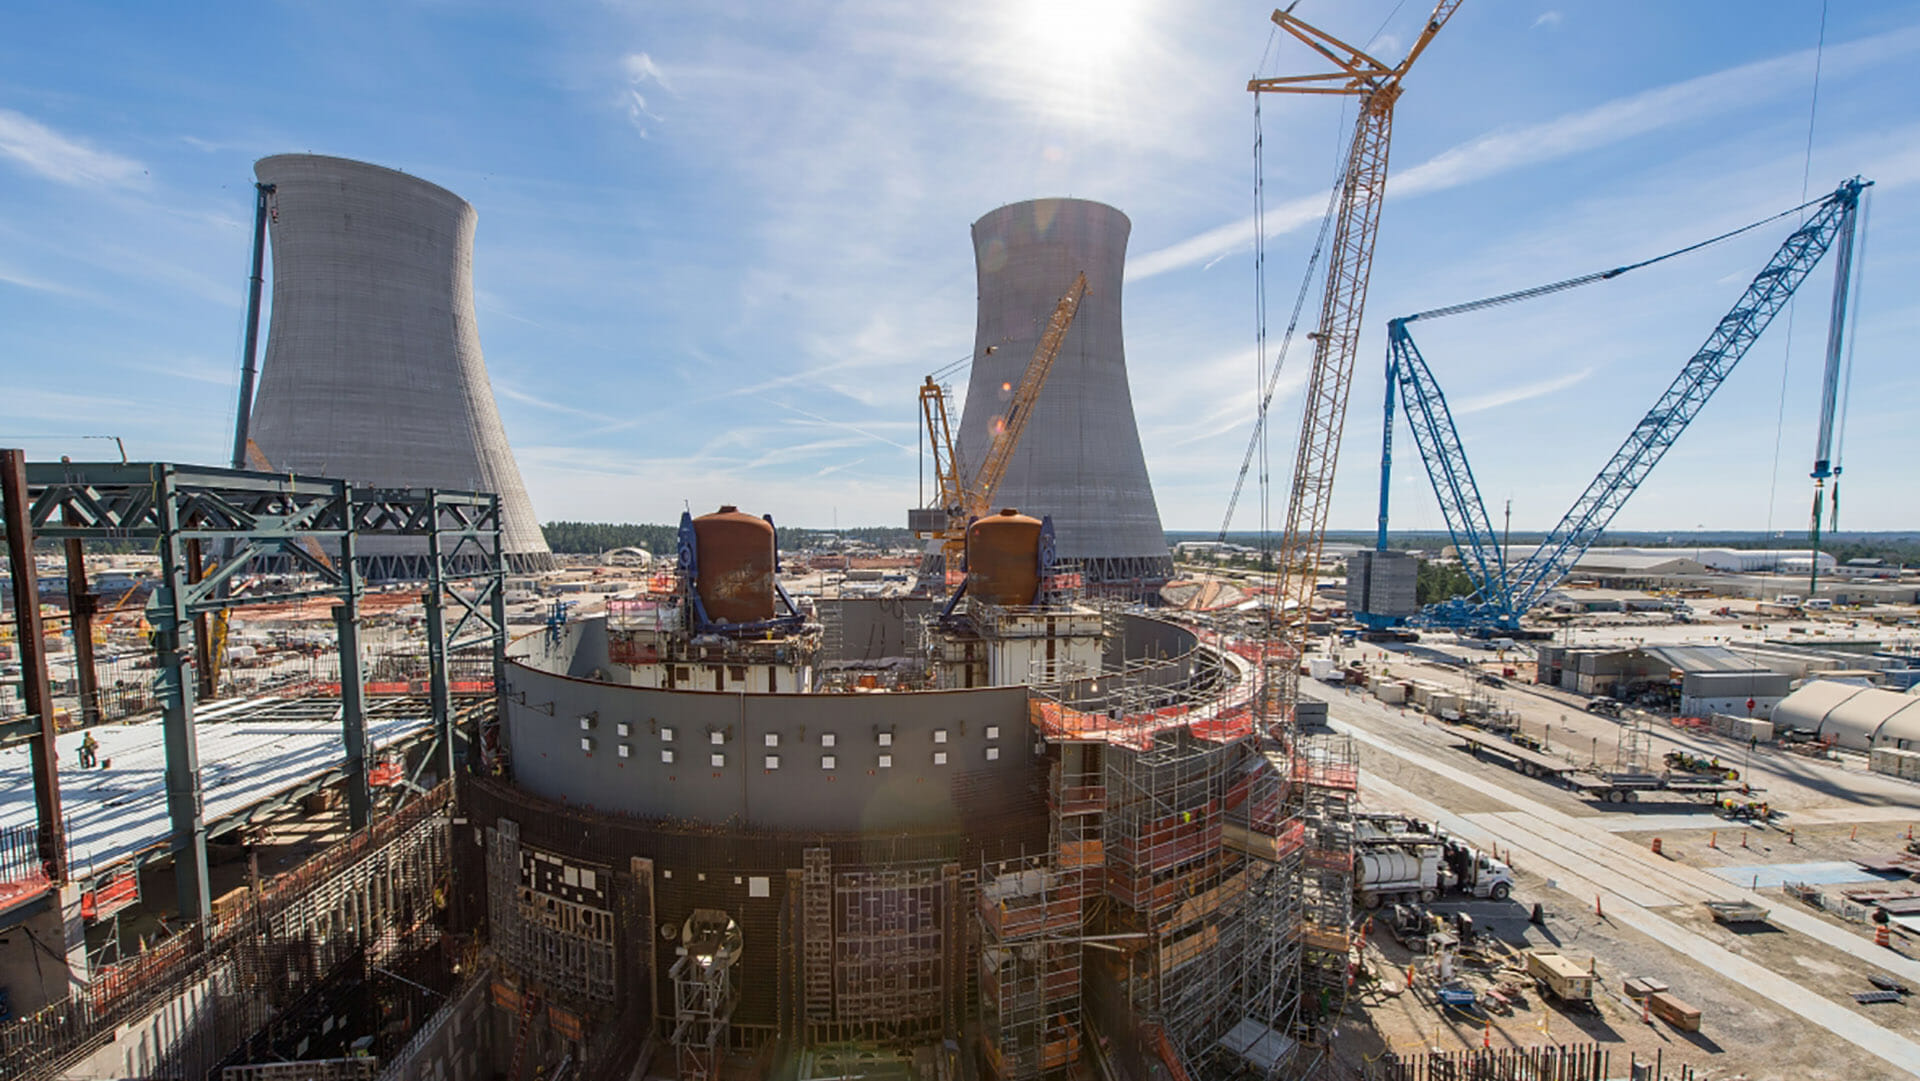 B&W Energy Services to Complete AquaLazing on One of the First U.S. Nuclear Plants in 30 Years